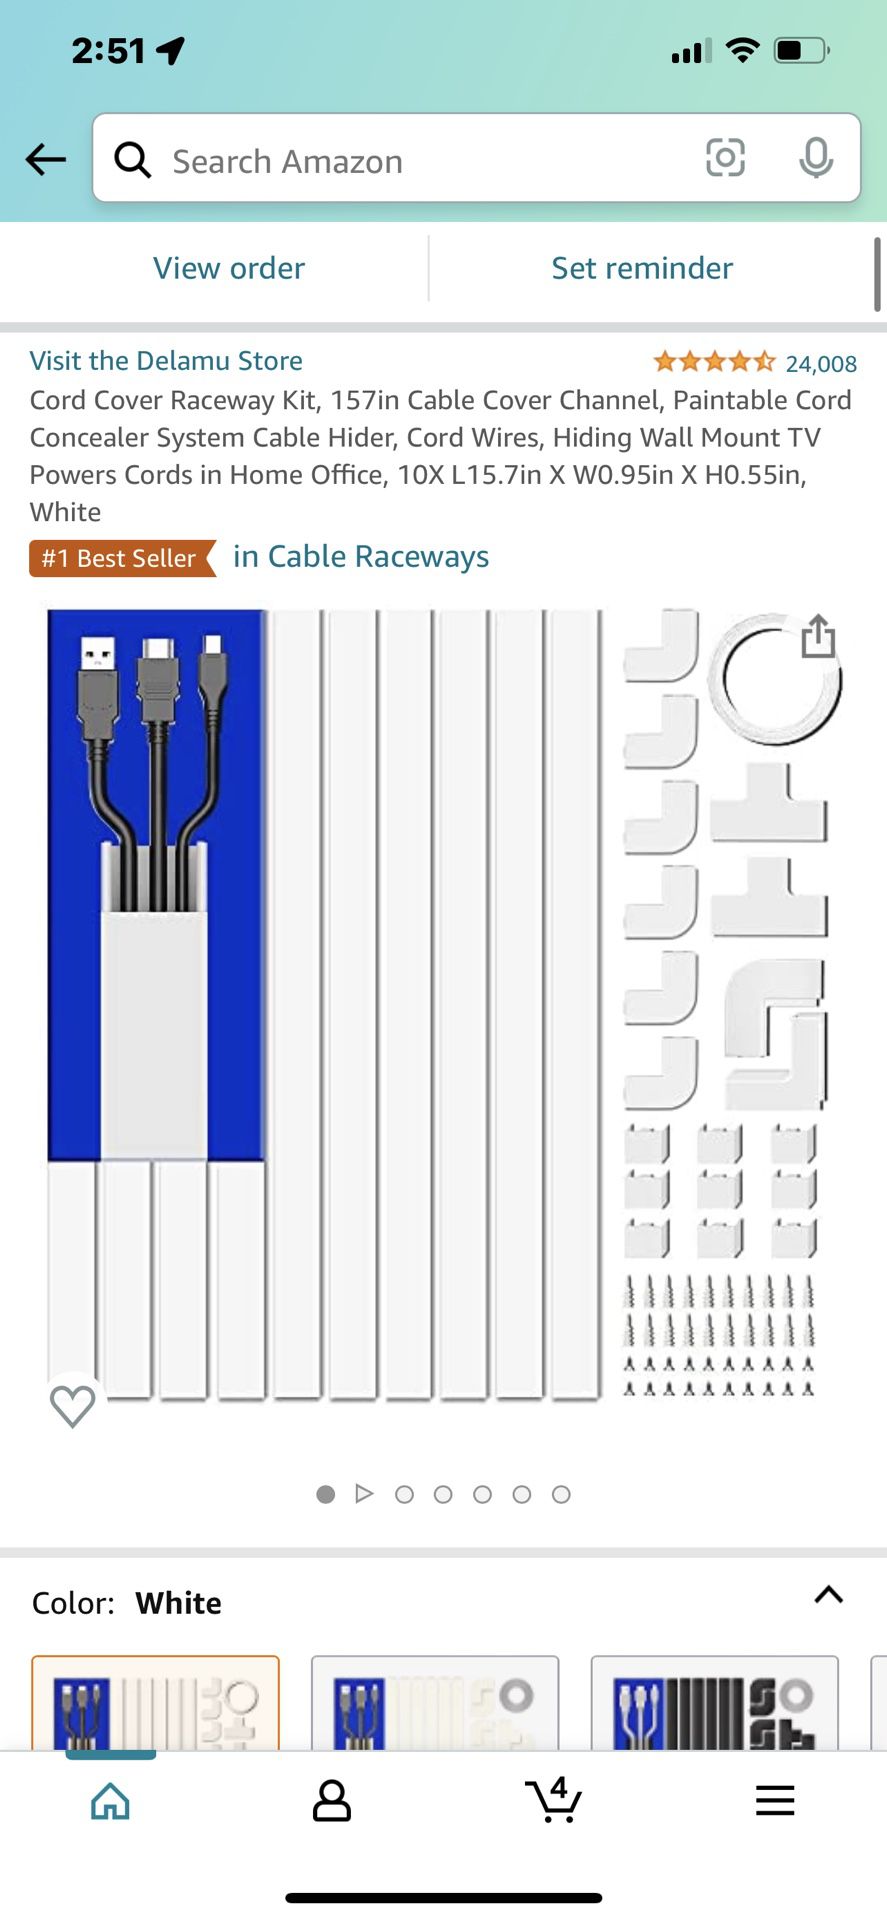 Cord Cover Raceway Kit, 157in Cable Cover Channel, Paintable Cord Concealer  System Cable Hider, Cord Wires